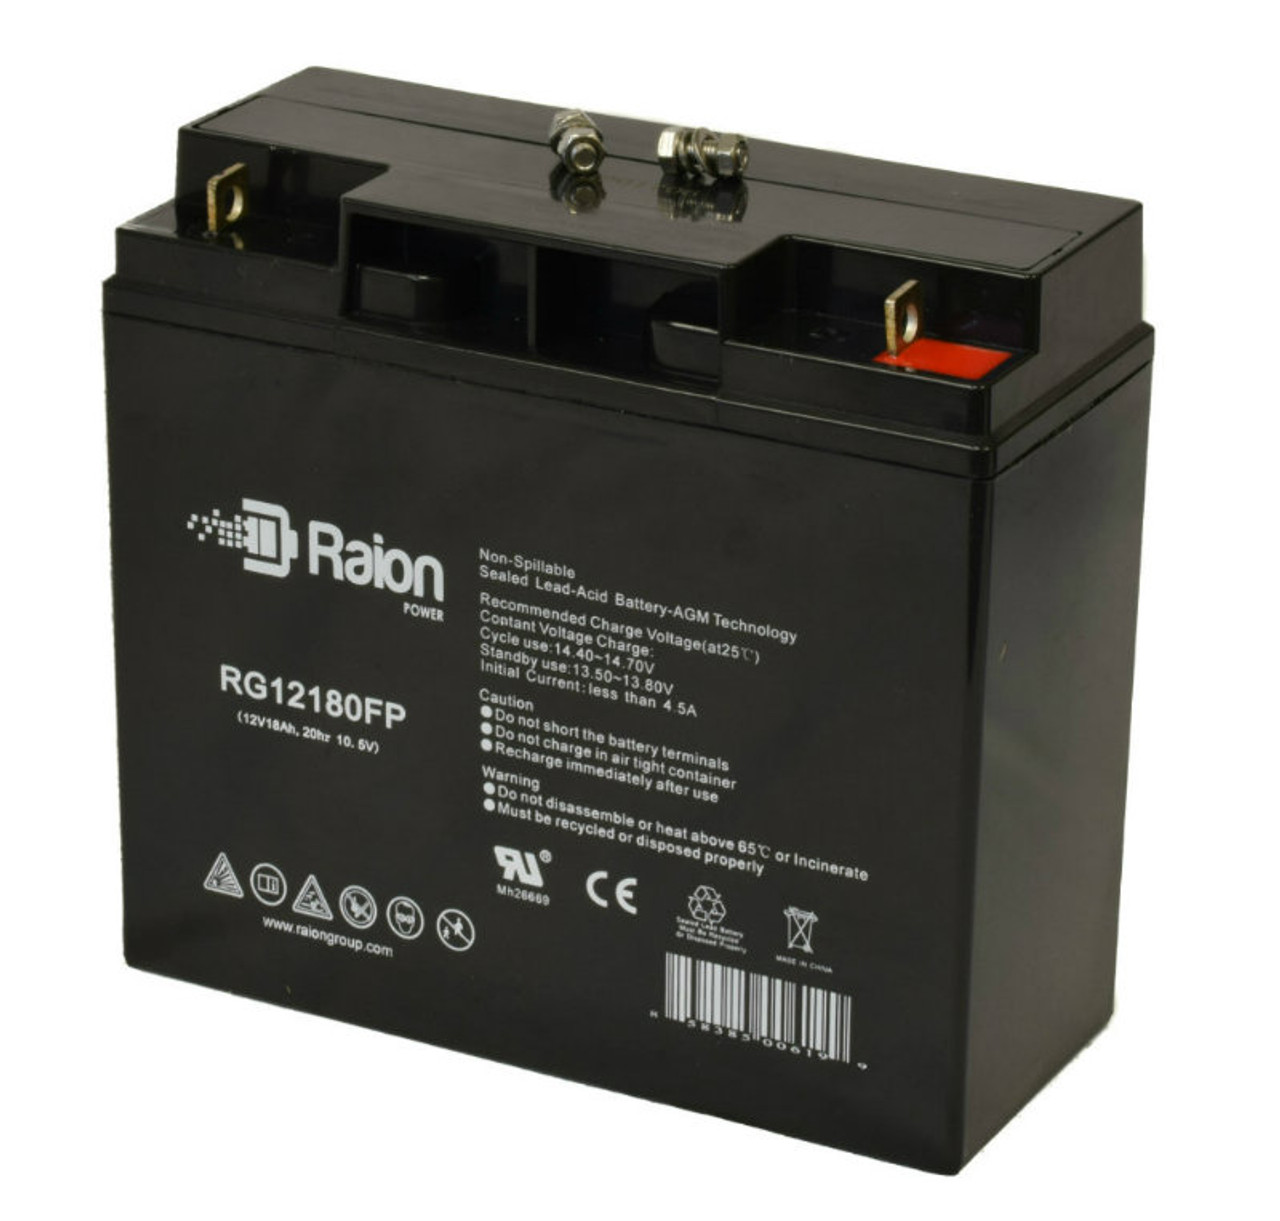 Raion Power Replacement 12V 18Ah Emergency Light Battery for Big Beam 2CL12S15 - 1 Pack